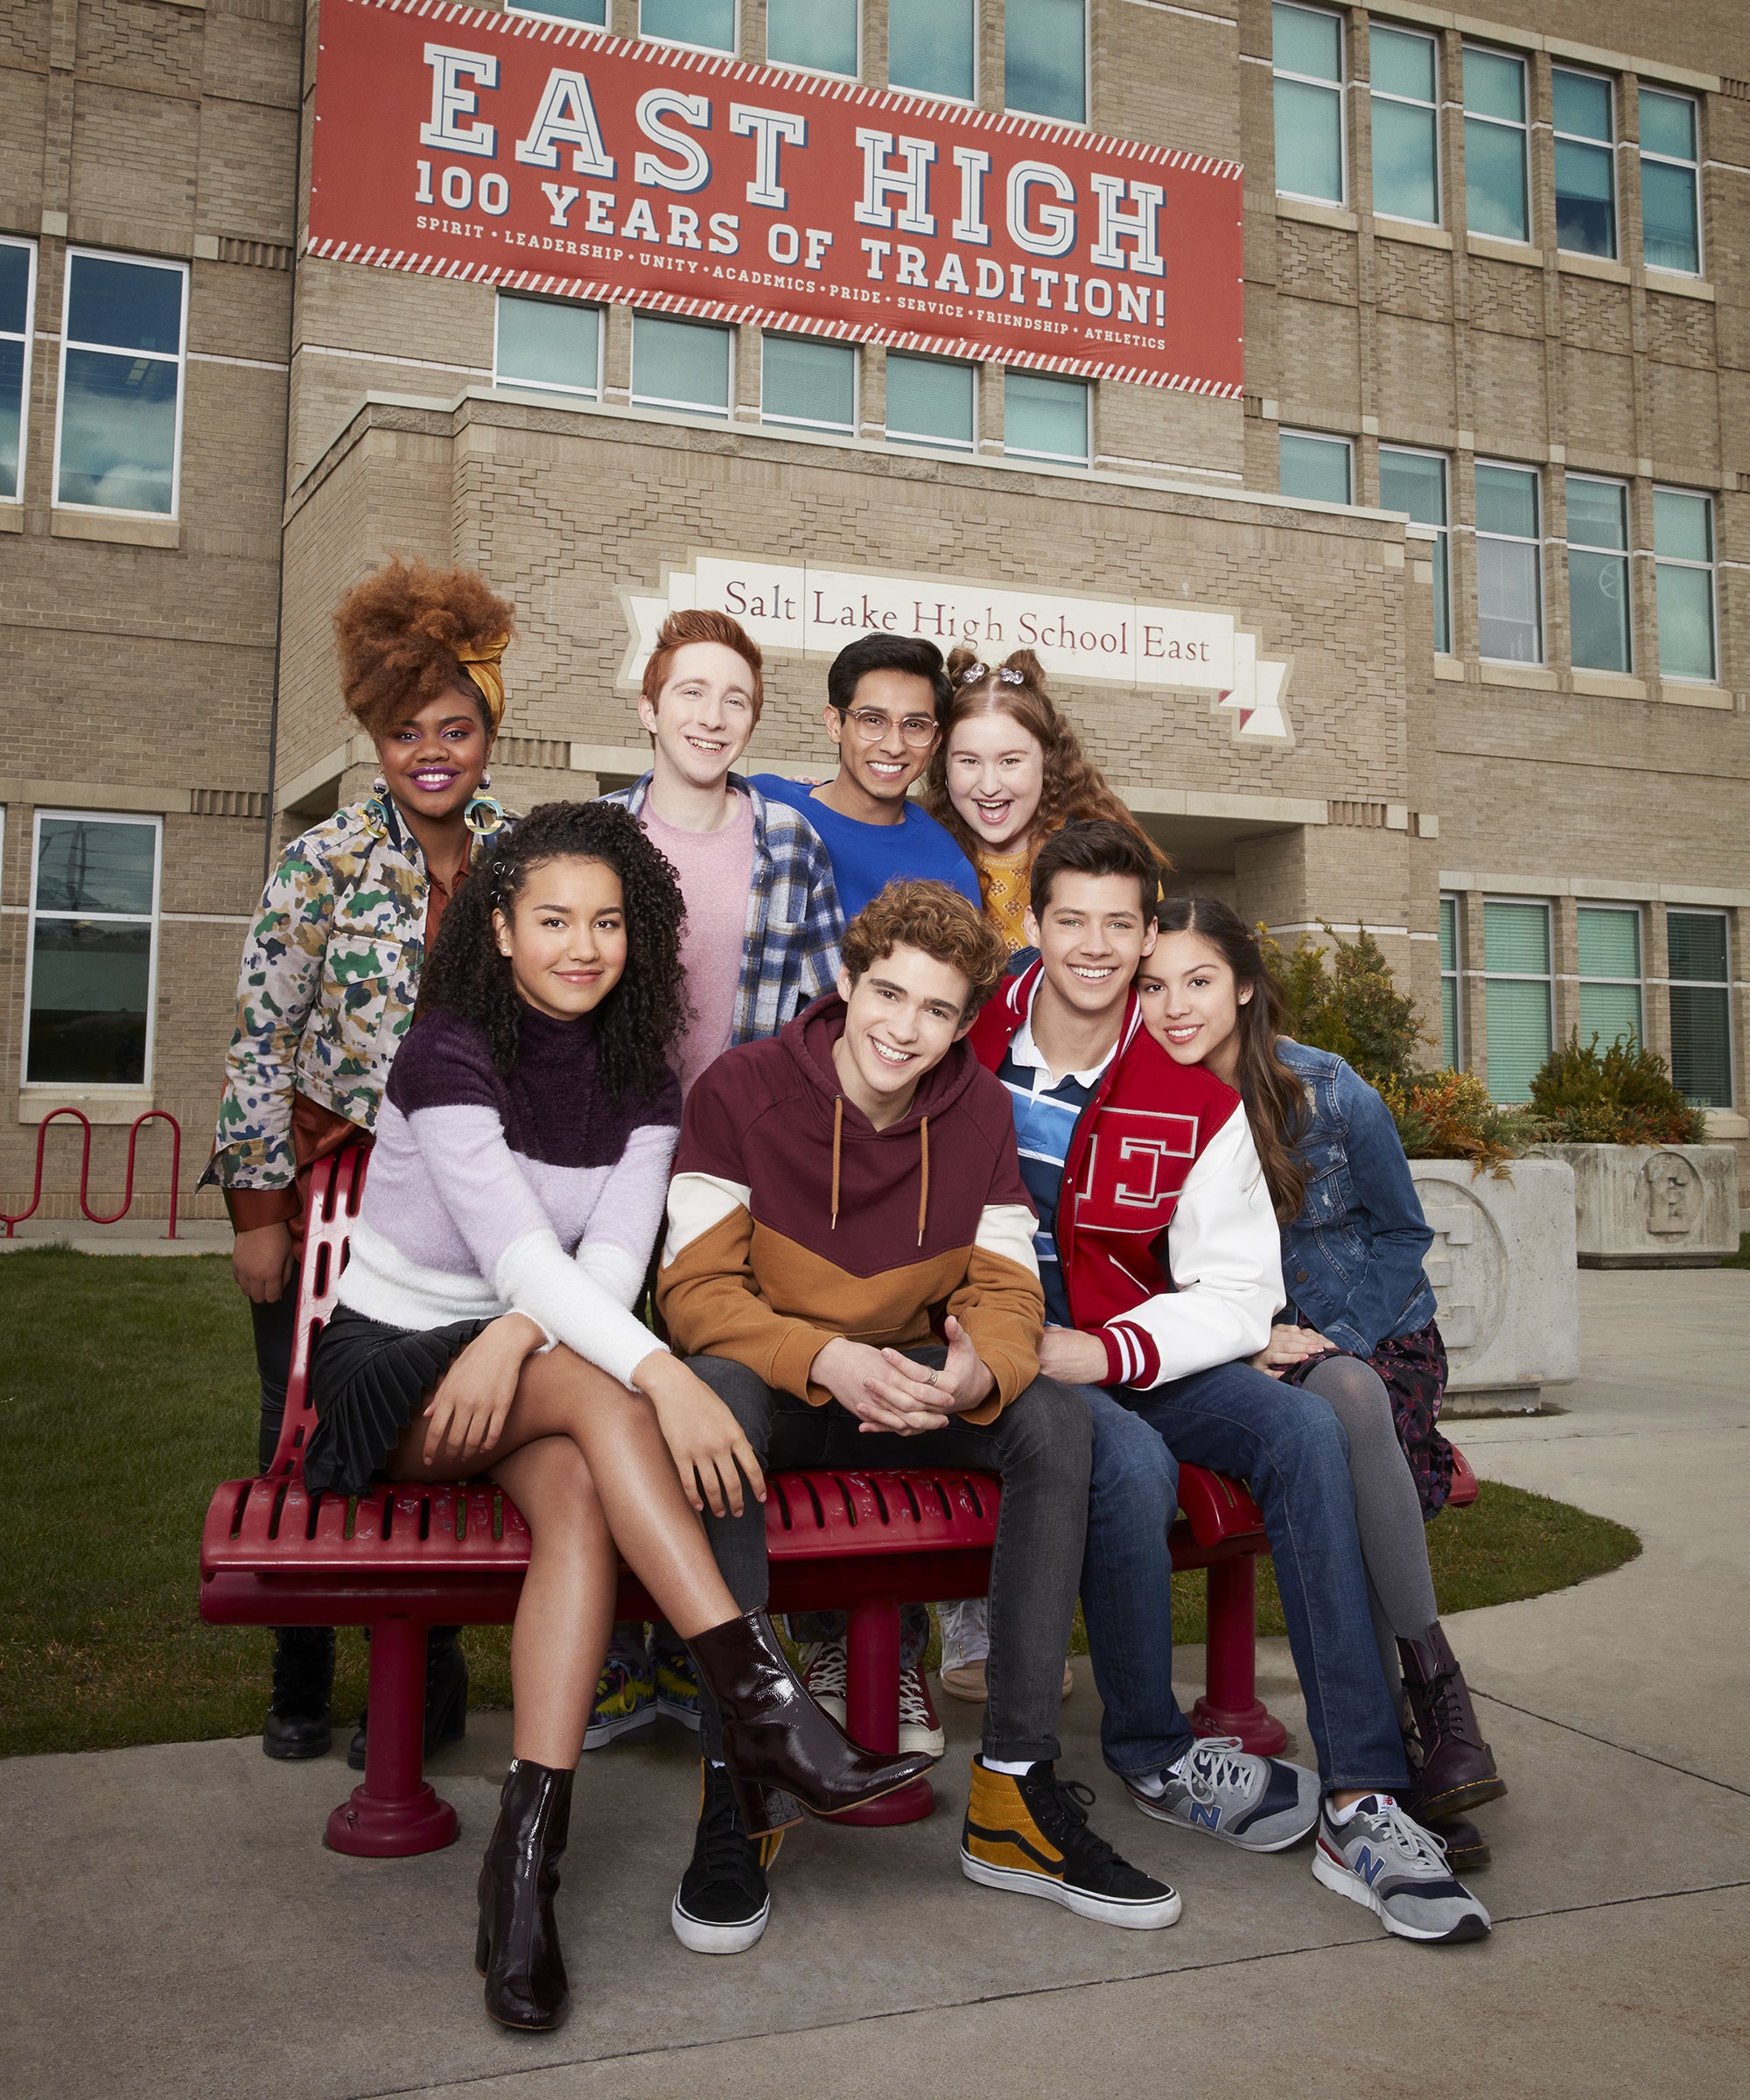 Who Are The Actors In The New High School Musical Show